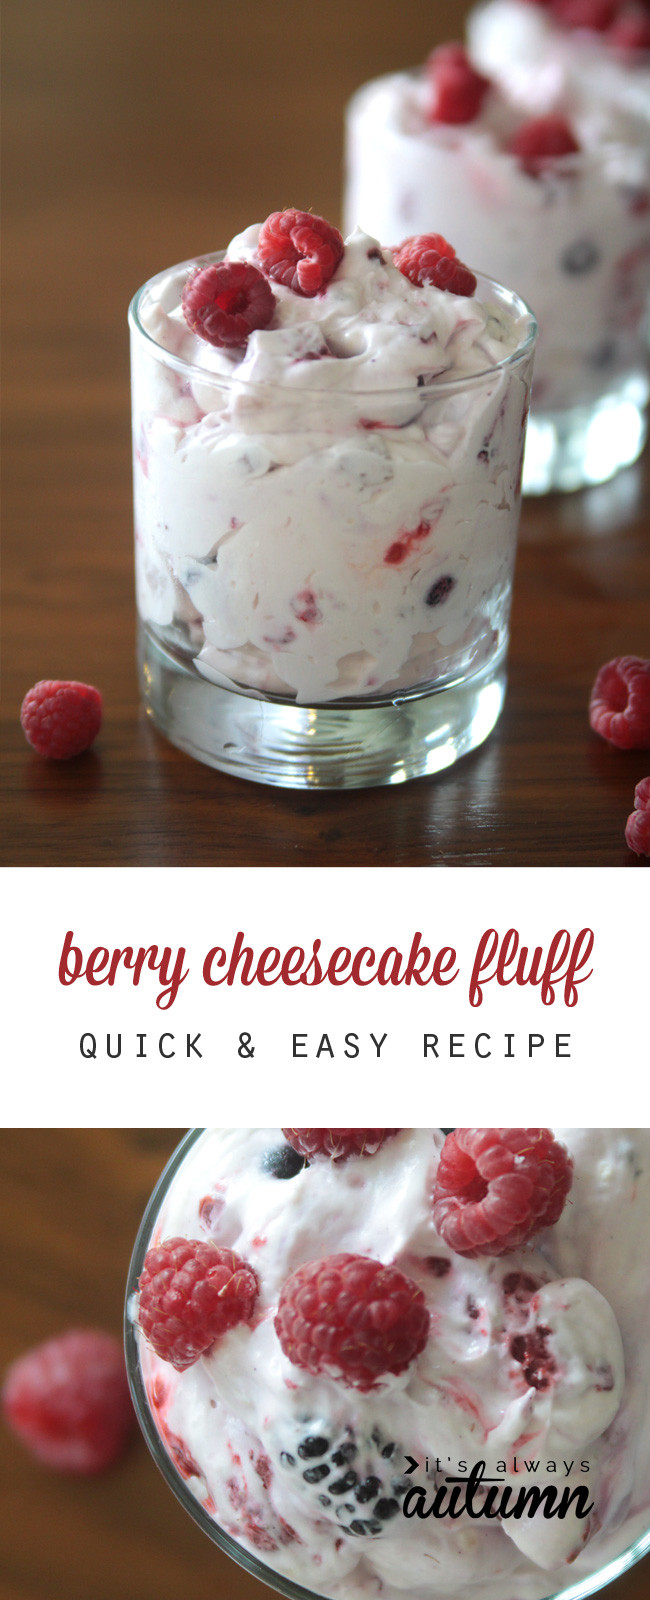 Holiday Desserts Easy
 berry cheesecake fluff a lighter holiday dessert It s